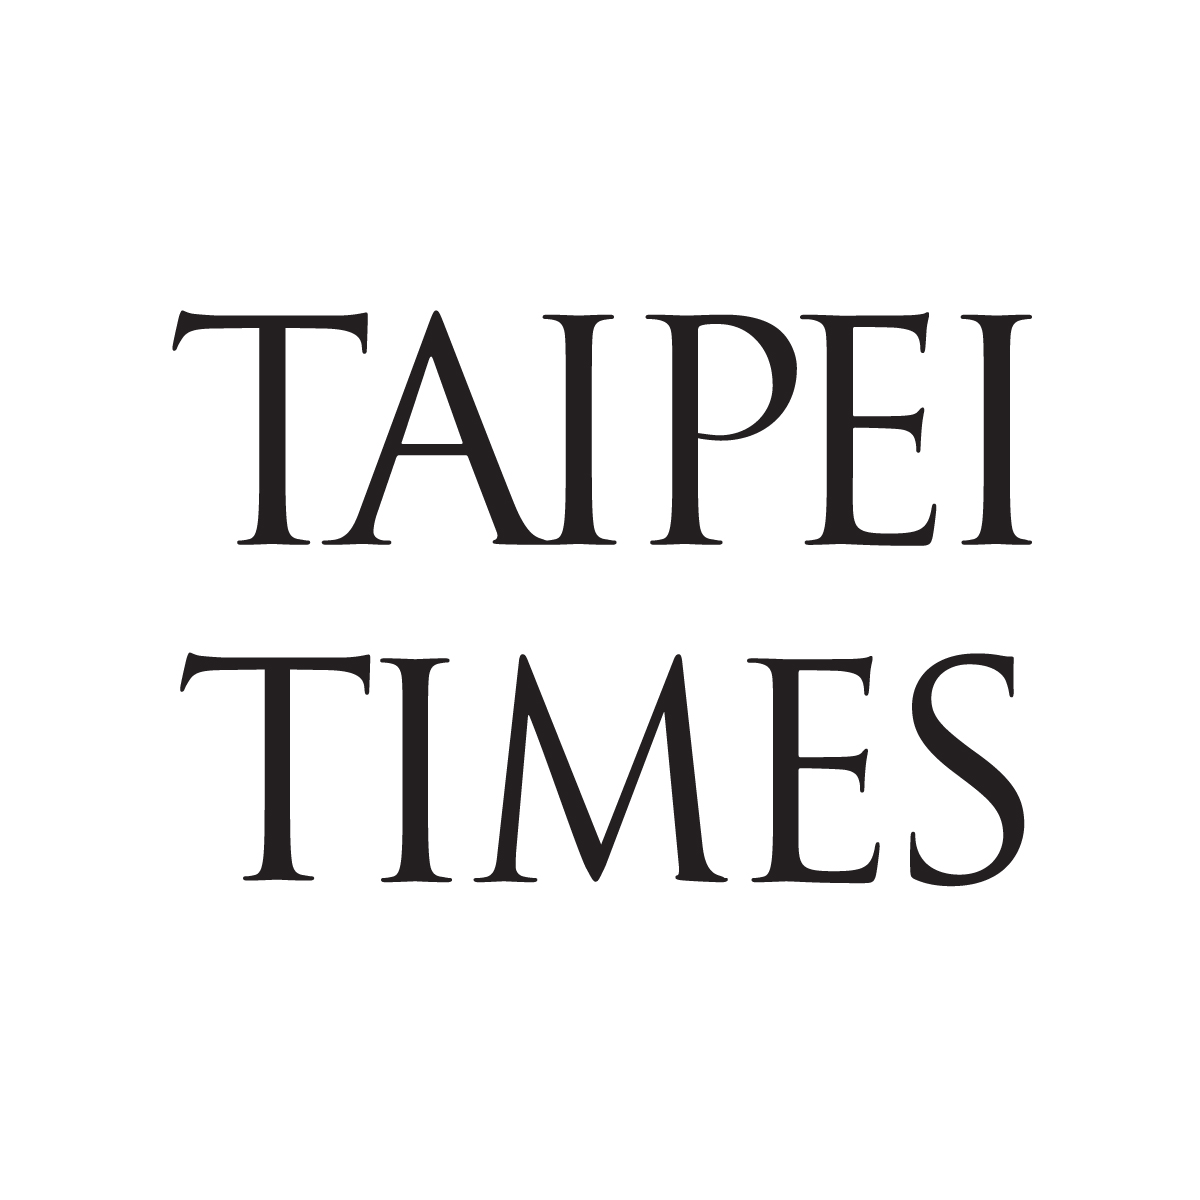 Foreign ministry to help NGOs provide aid in Africa, India - Taipei Times